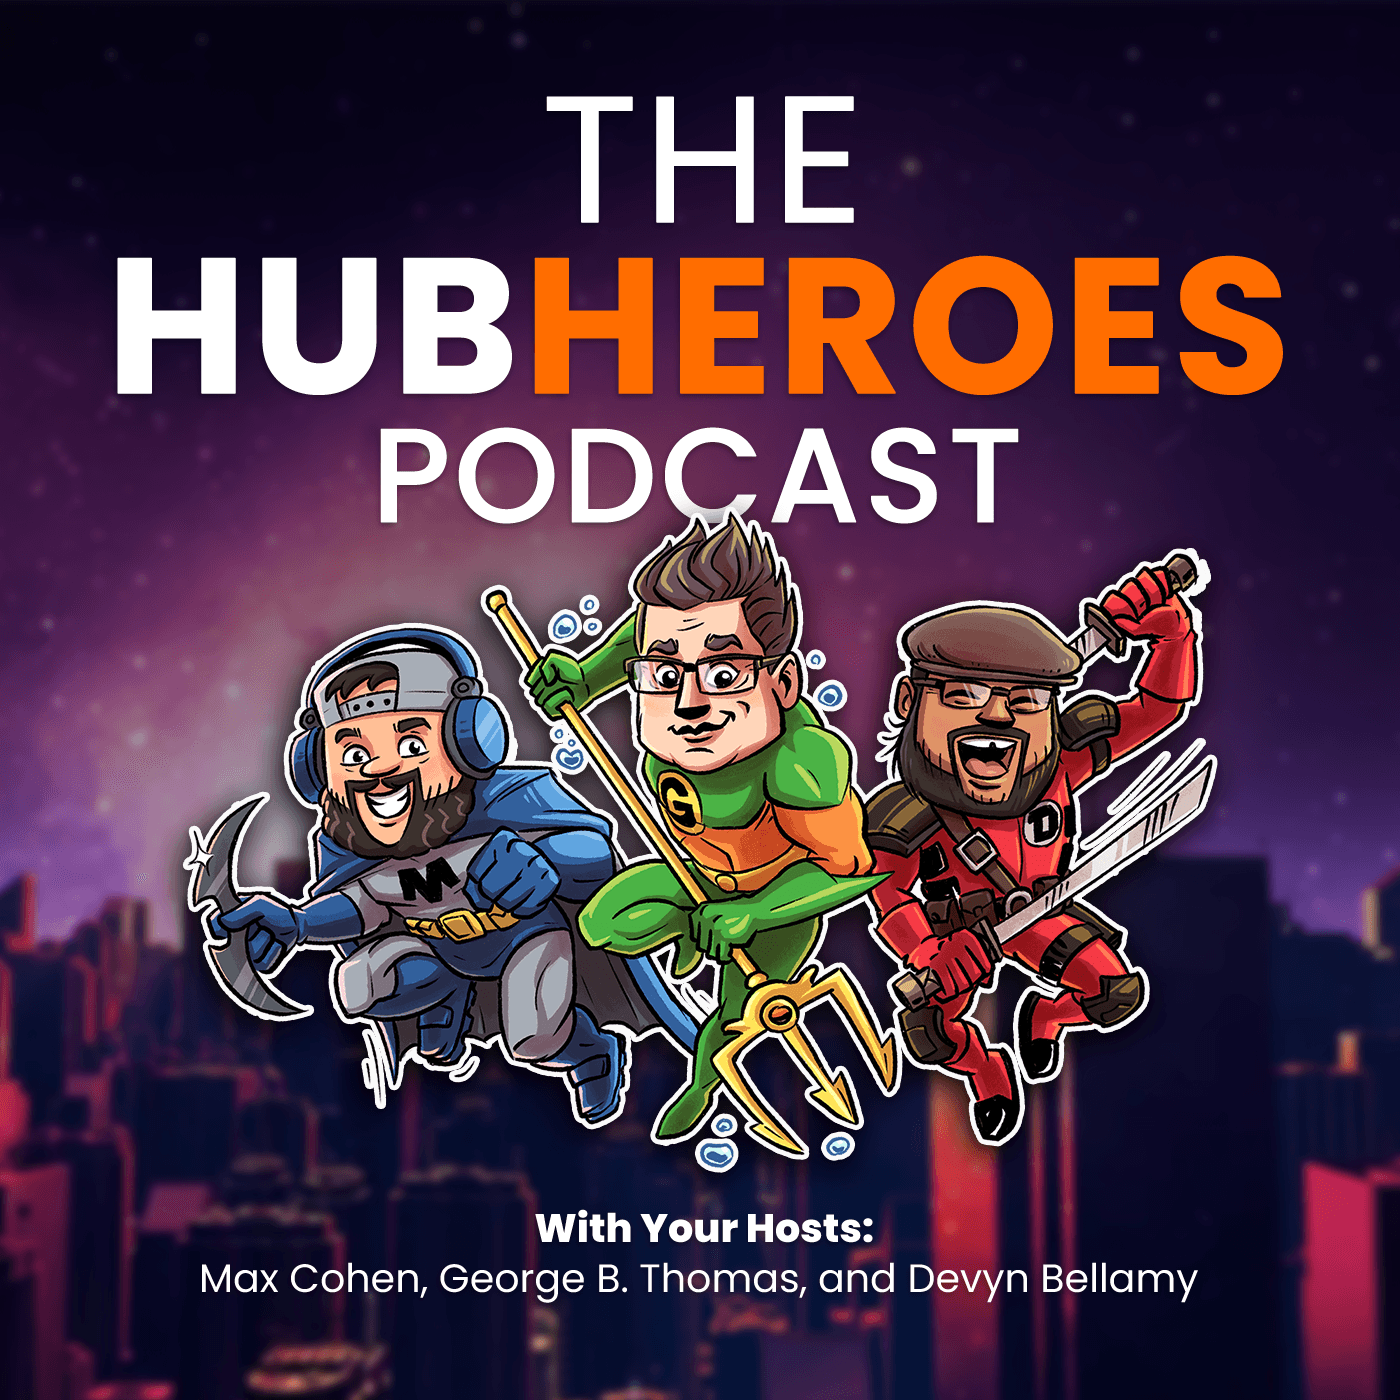 HubSpot playbooks: What they are and how to use them (HubHeroes, Ep. 24)